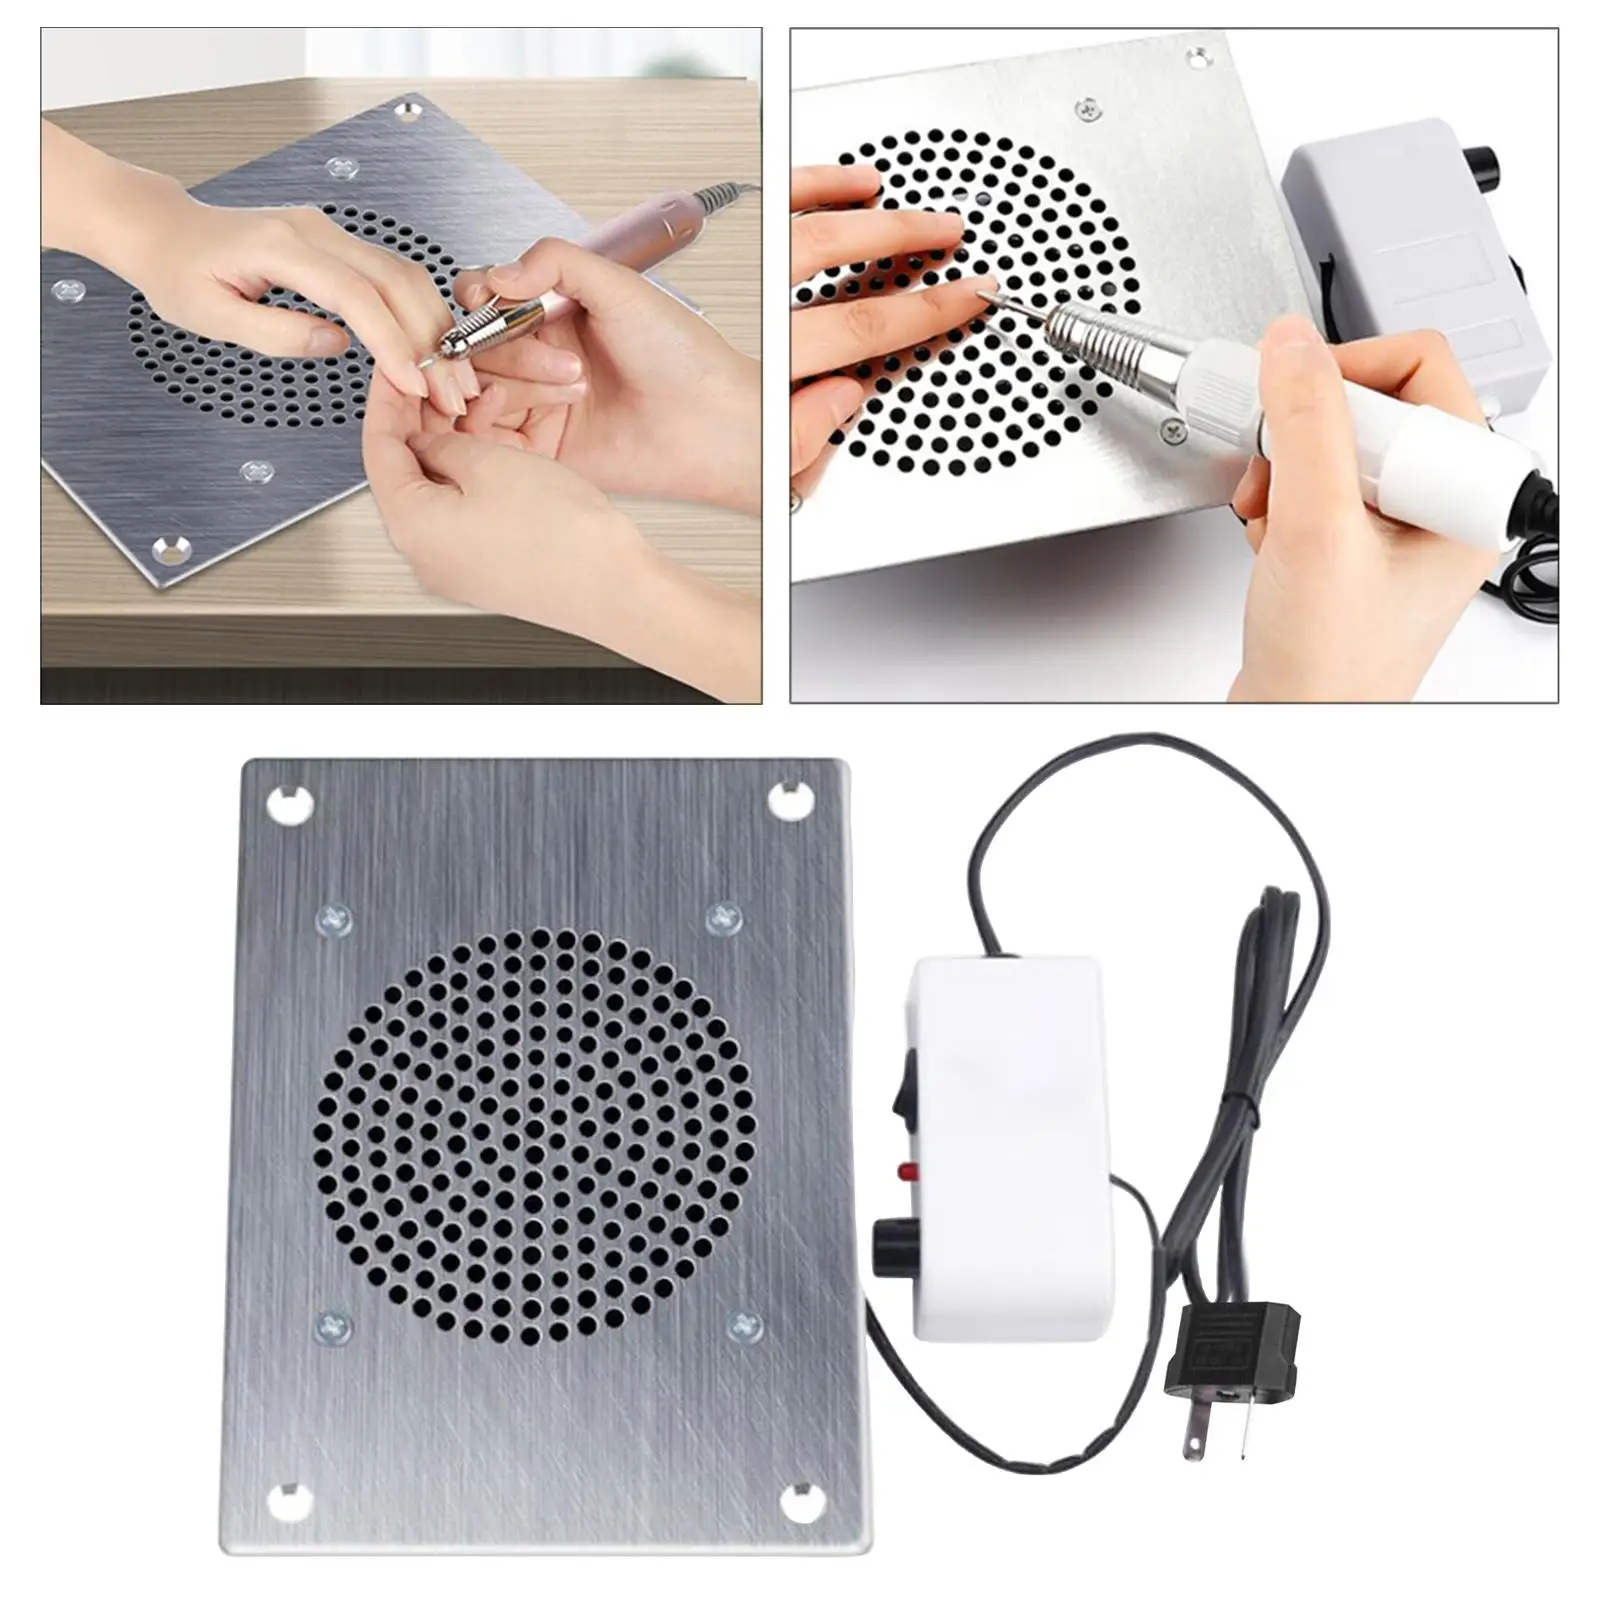 Nail Dust Collector Manicure Tools Electric Dust Suction Machine for Nail Polishing Acrylic Gel 110V US Professional Low Noise